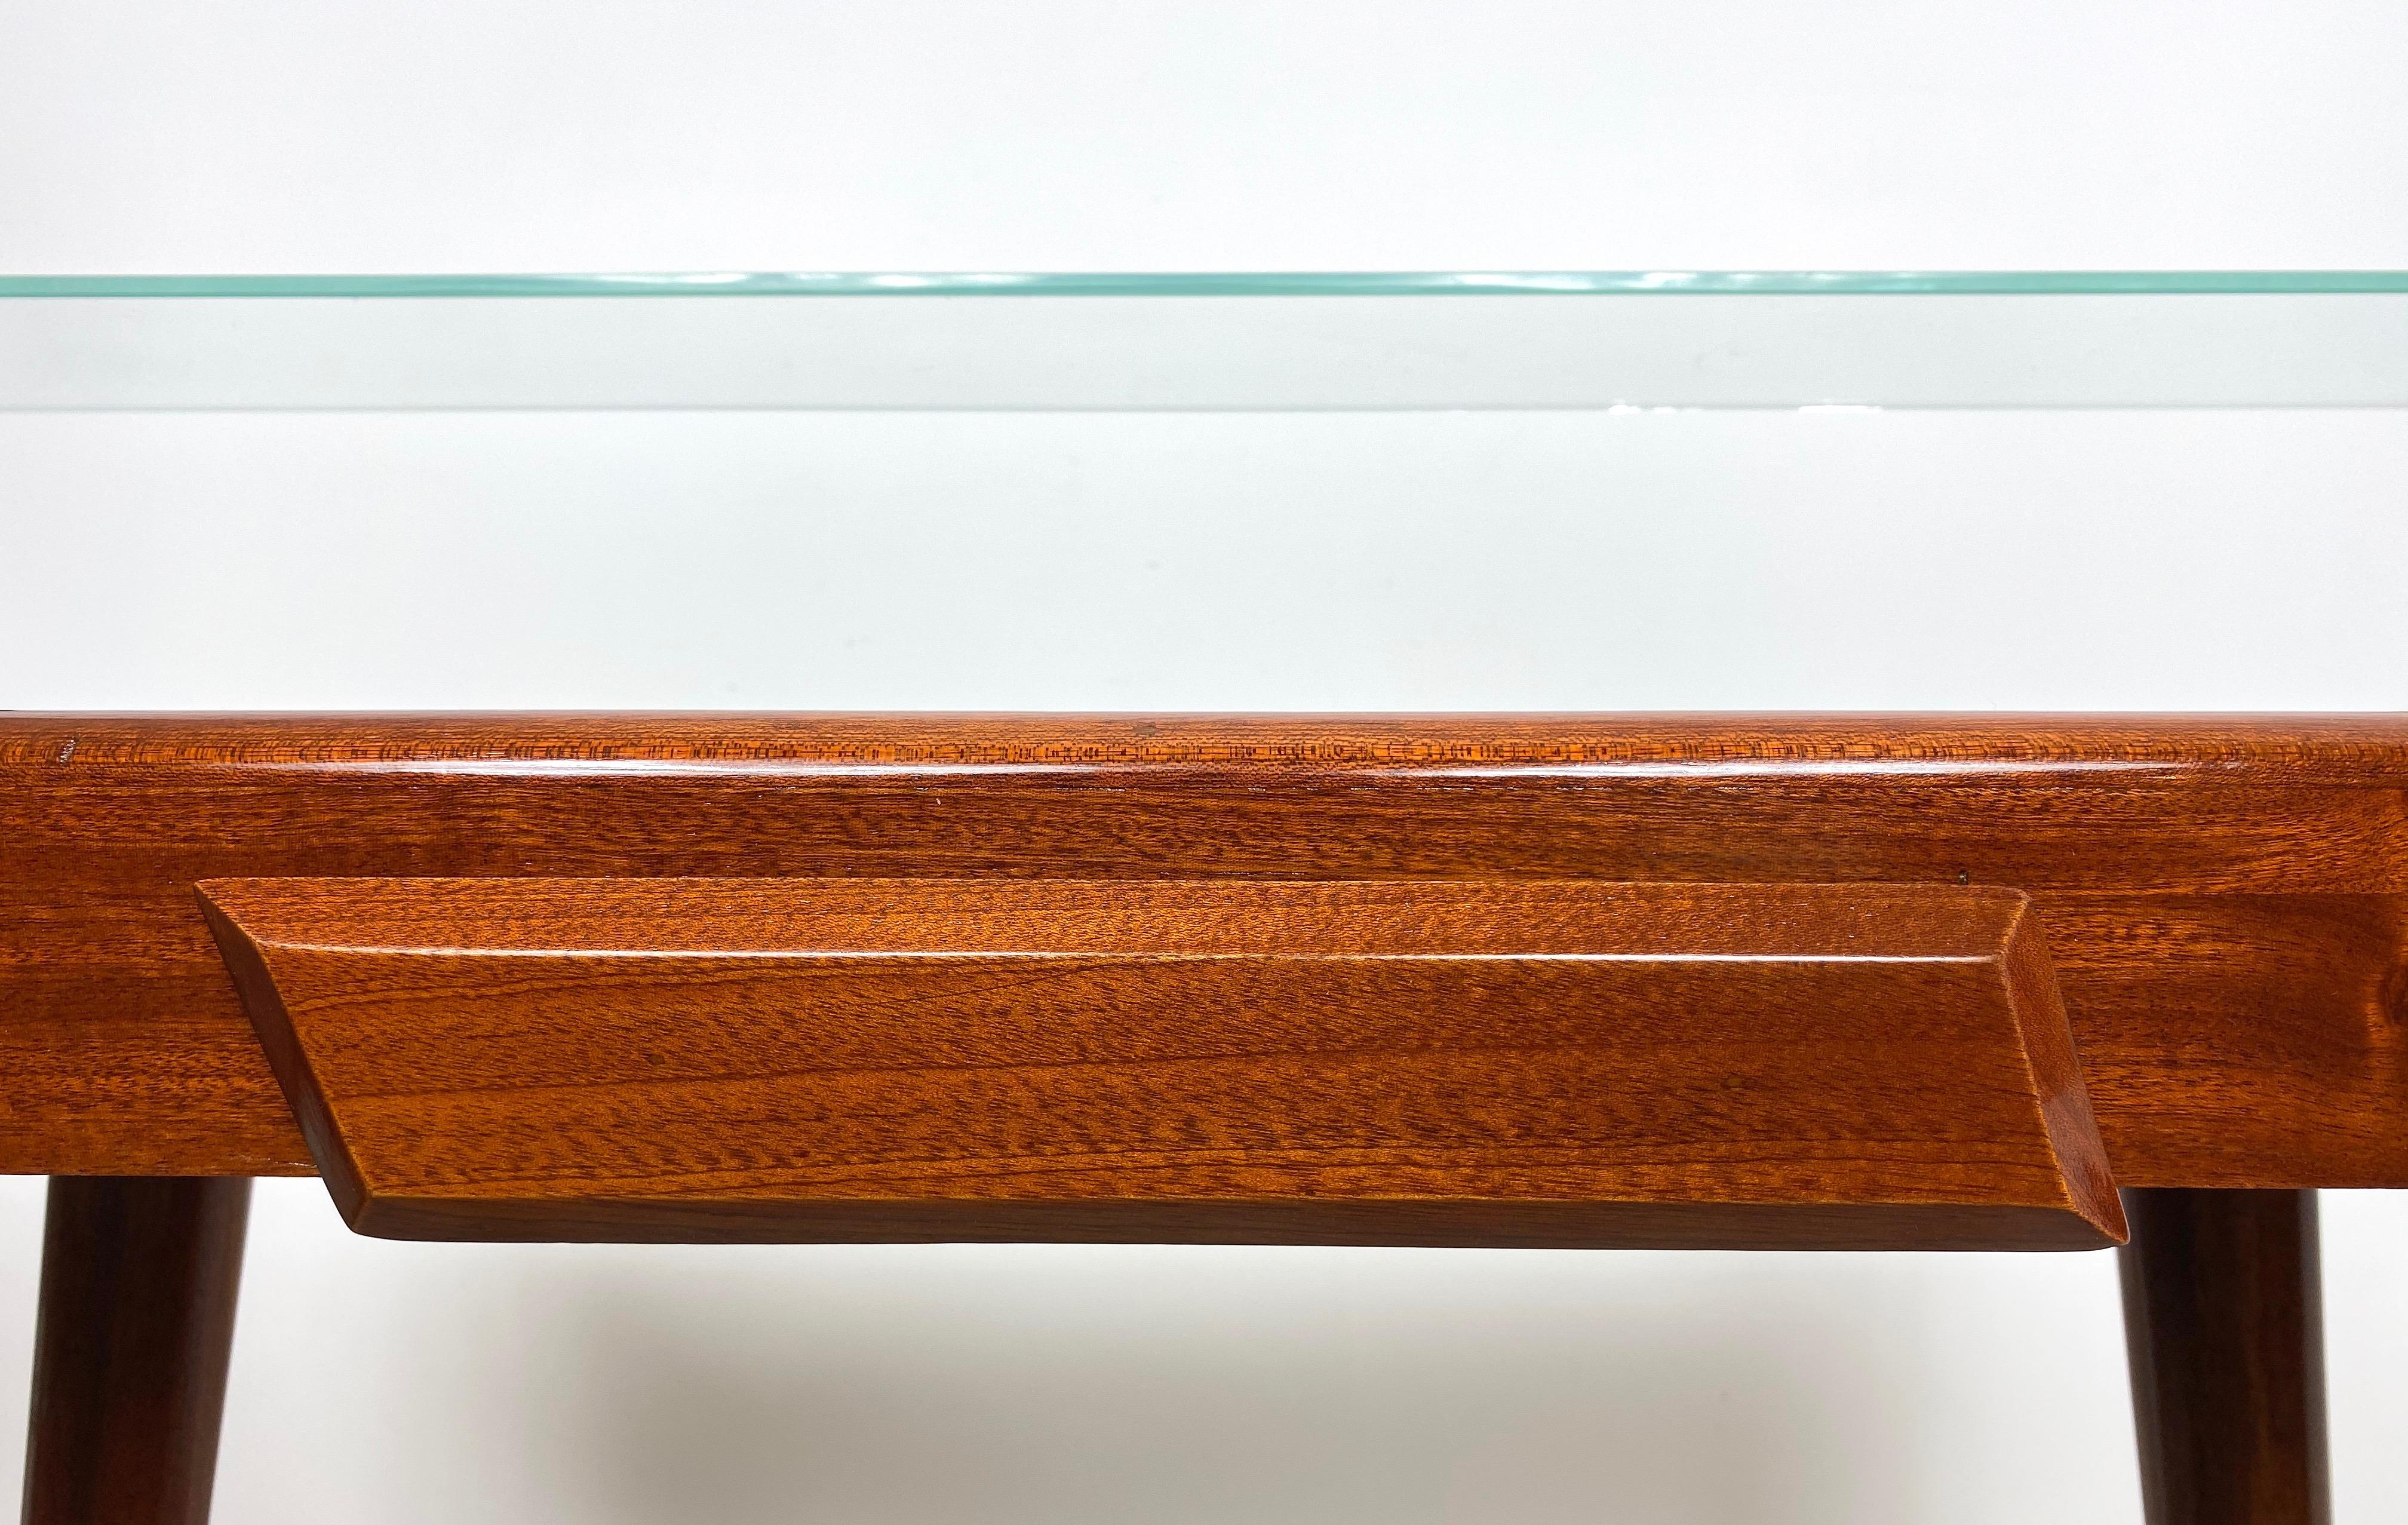 Italian Midcentury Mahogany Wood and Glass Console Table by Carlo de Carli 1950s For Sale 8